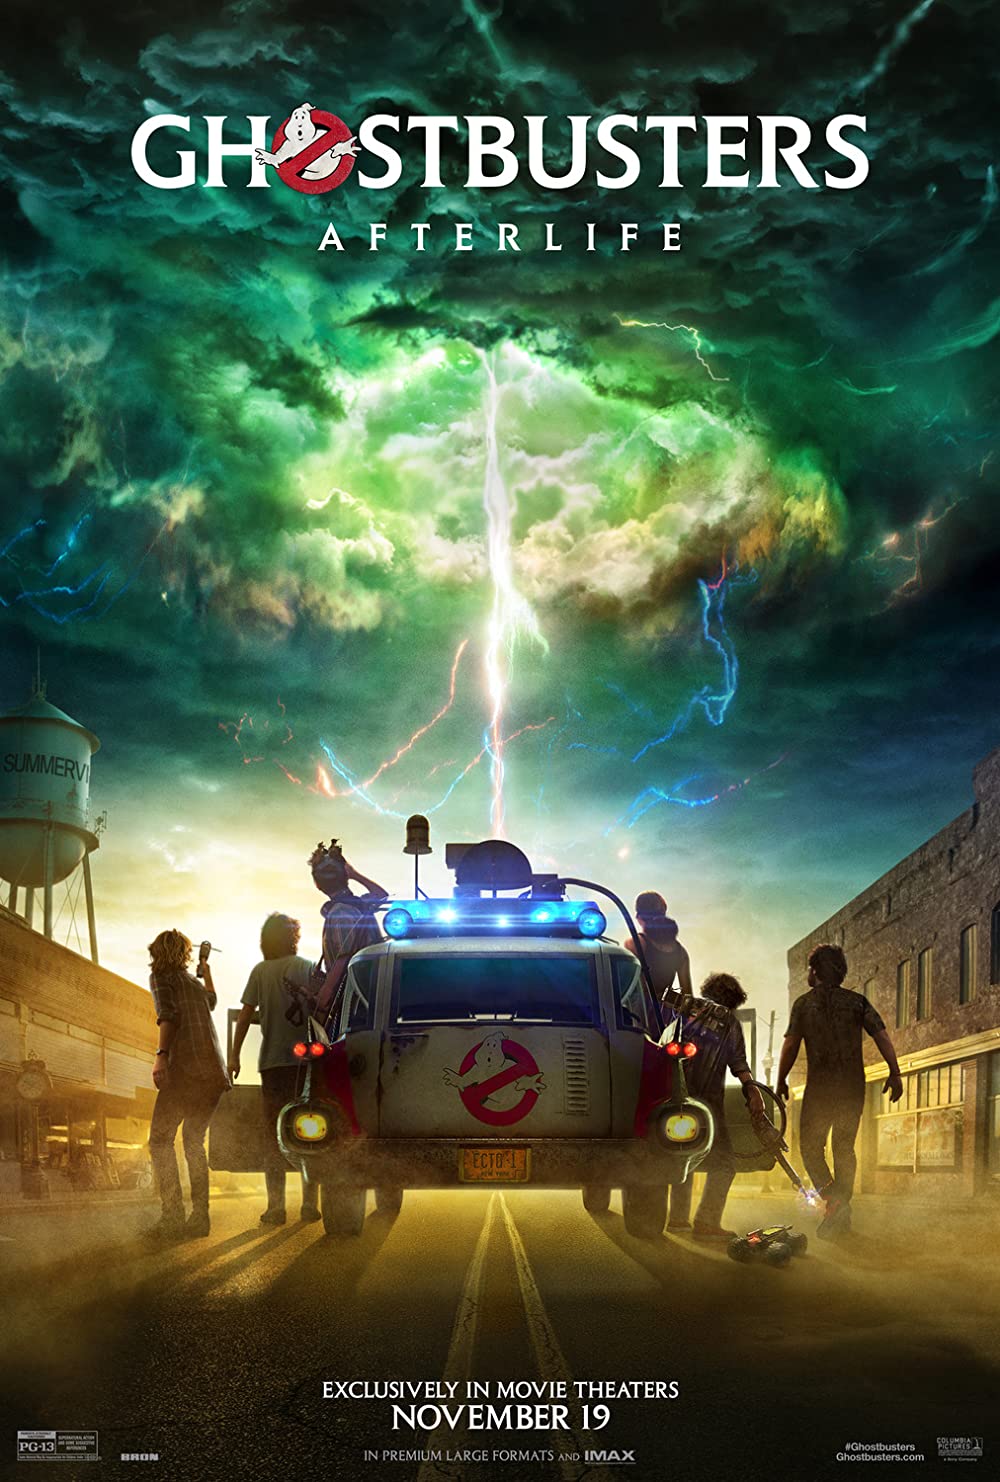 Ghostbusters Afterlife in theaters November 19th